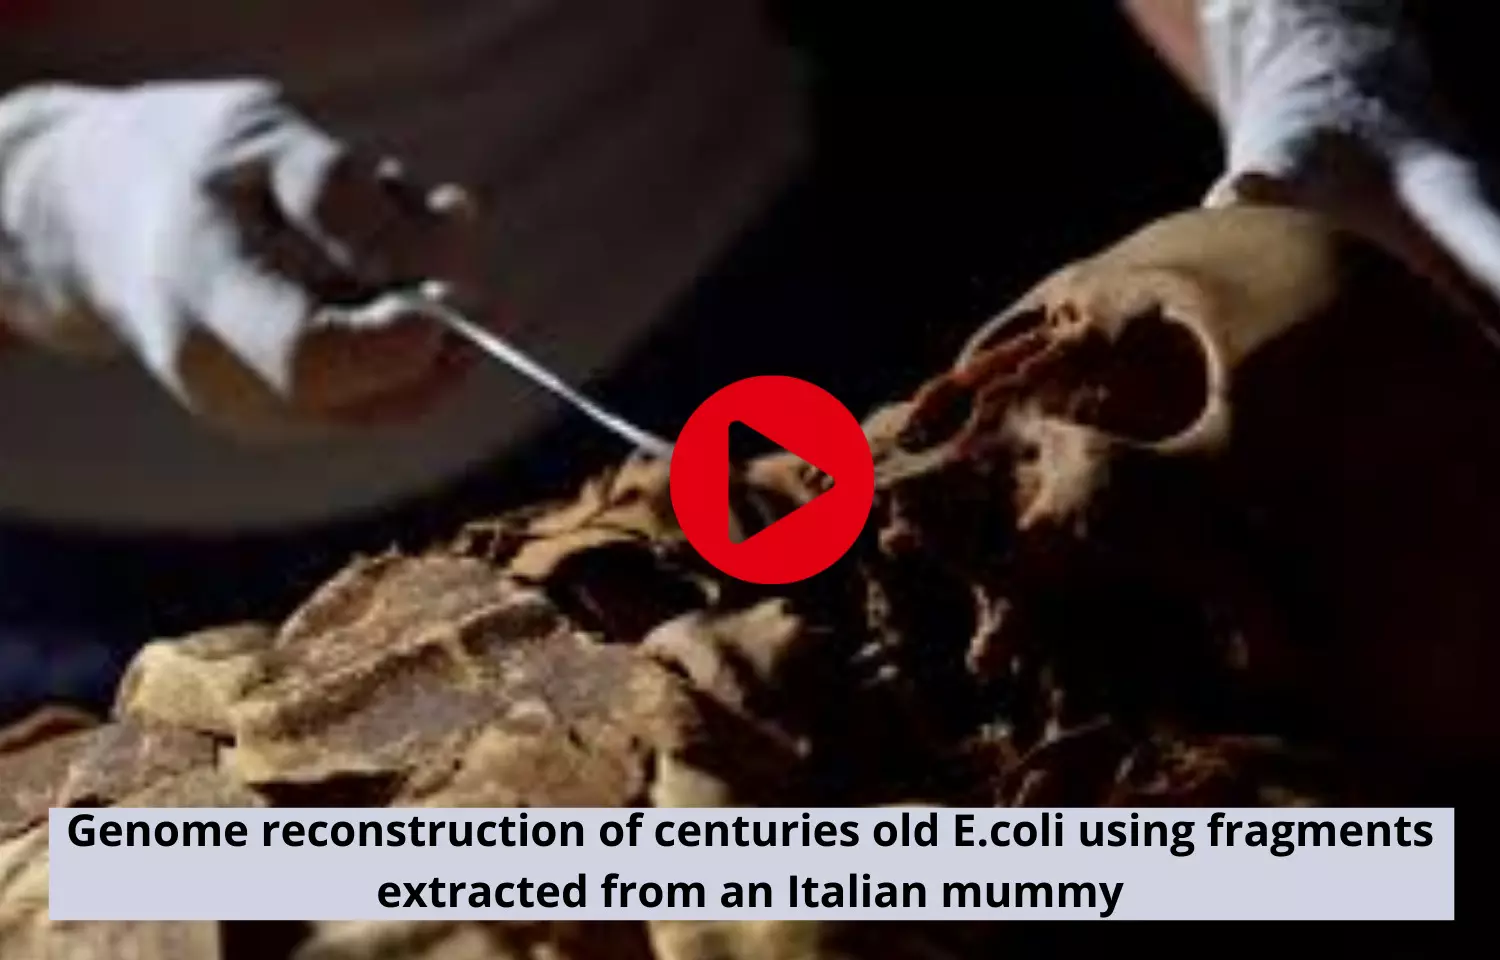 Genome reconstruction of centuries old E.coli using fragments extracted from an Italian mummy